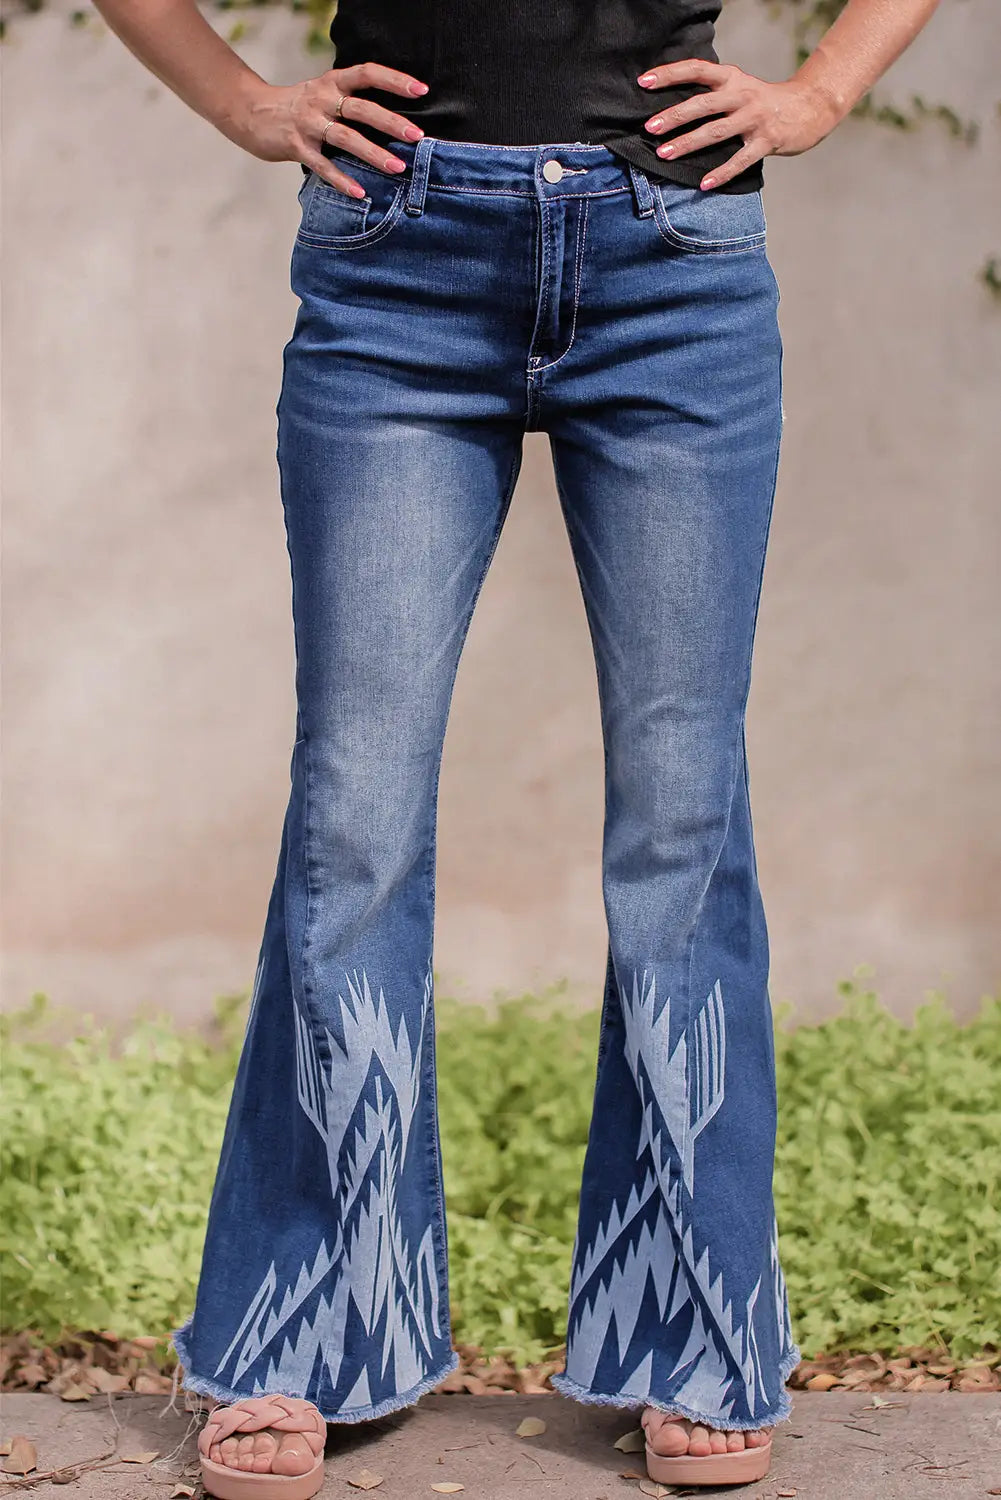 Blue western pattern high rise flare jeans - 6 75% cotton + 24% polyester + 1% elastane